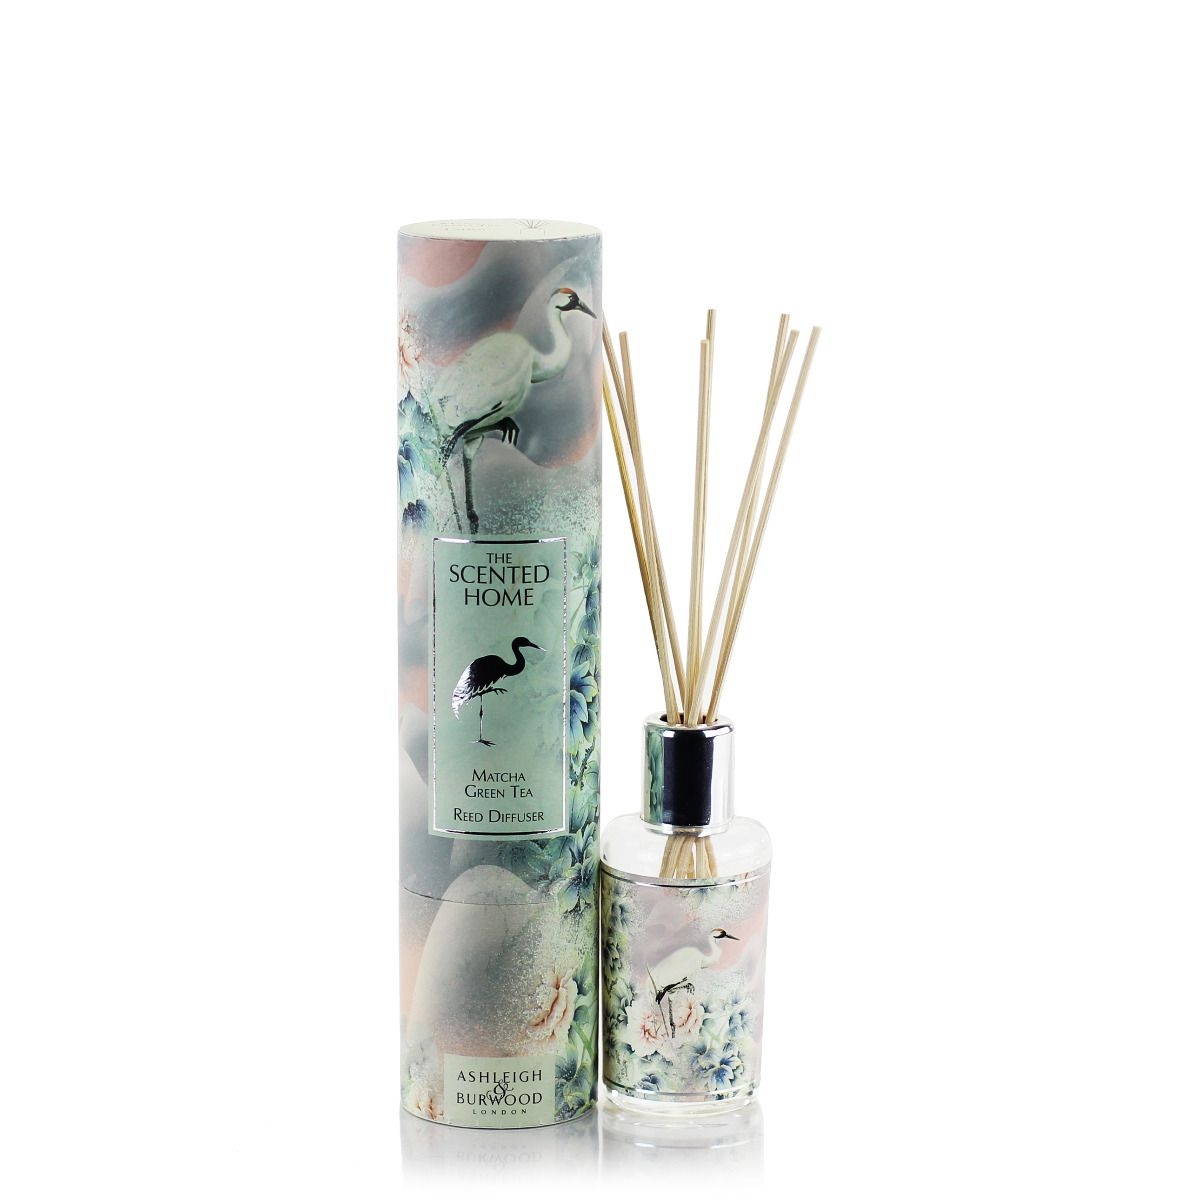 Matcha Green Tea 150ml Diffuser The scented home